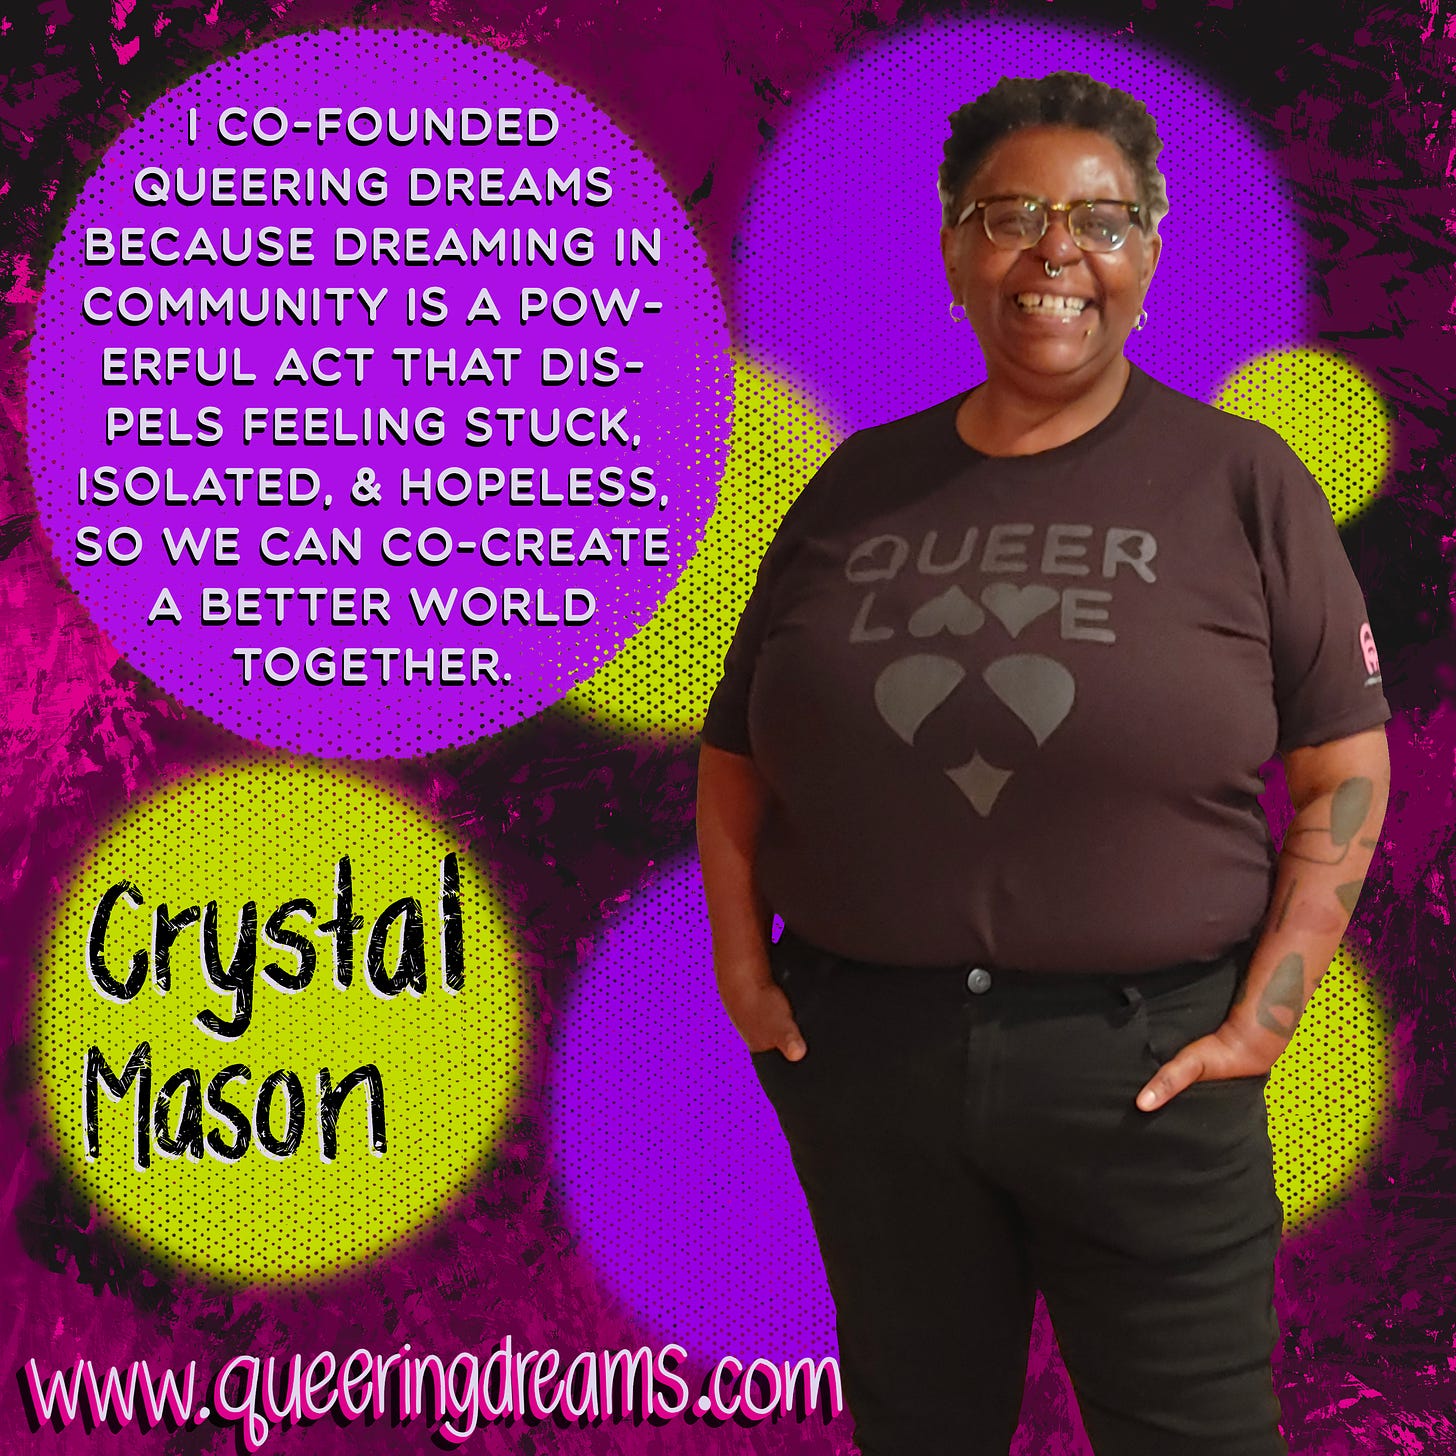 “I Co-Founded Queering Dreams because dreaming in community is a powerful act that dispels feeling stuck, isolated, & hopeless, so we can co-create a better world together,” in white typeface against a purple dot. “Crystal Mason,” in black hand lettering against a yellow dot. Crystal is a Black queer artist, is smiling & looking into the camera, and is wearing the Queer Love tee. www.queeringdreams.com All set against a pink with black splotchy paint background.